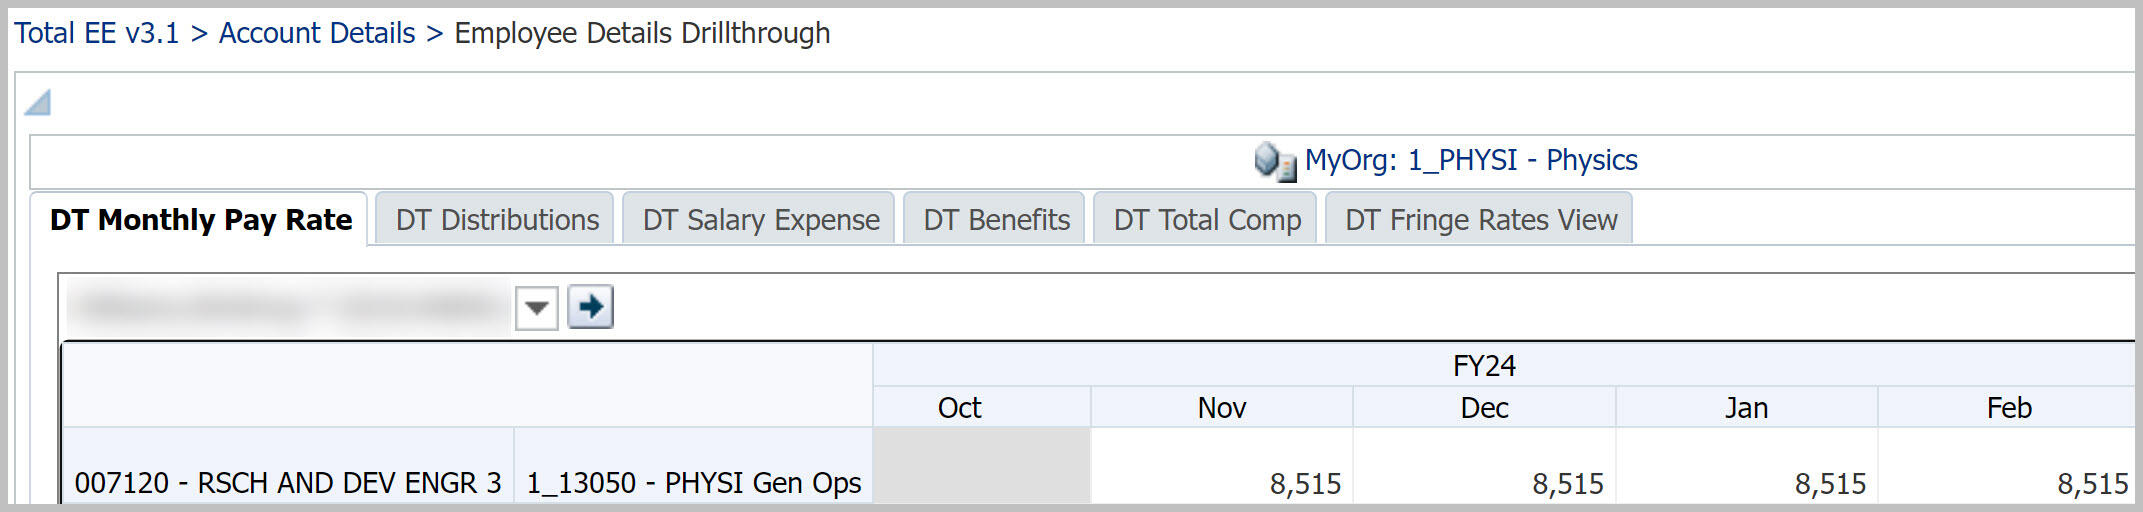 Compensation Drill Through Employee Details DT Monthly Pay Rate